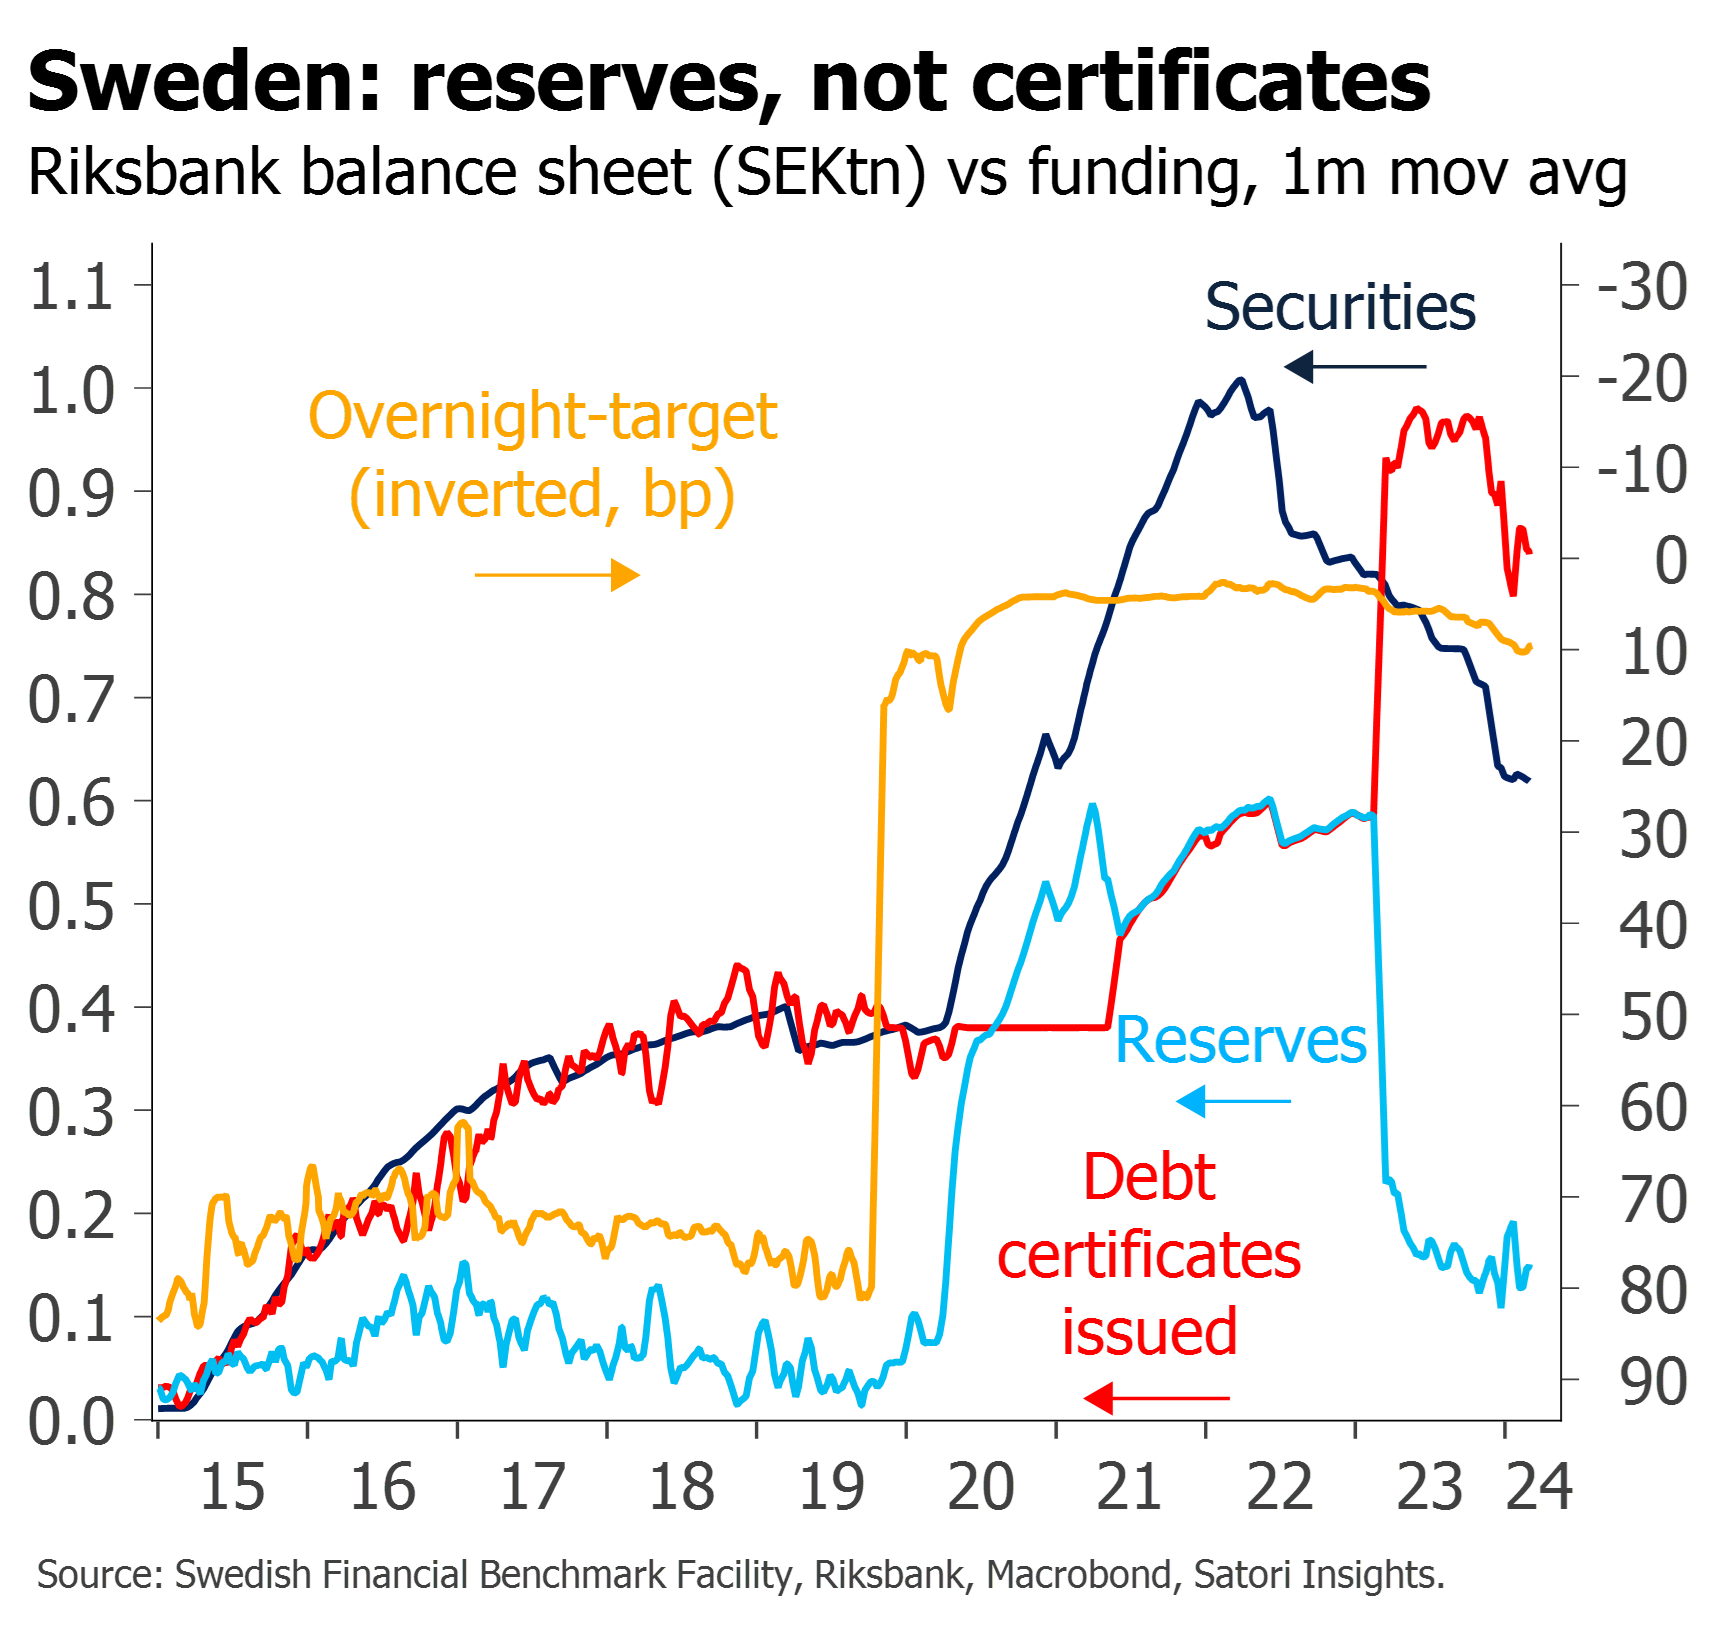 sweden reserves and debt certificates vs funding spreads